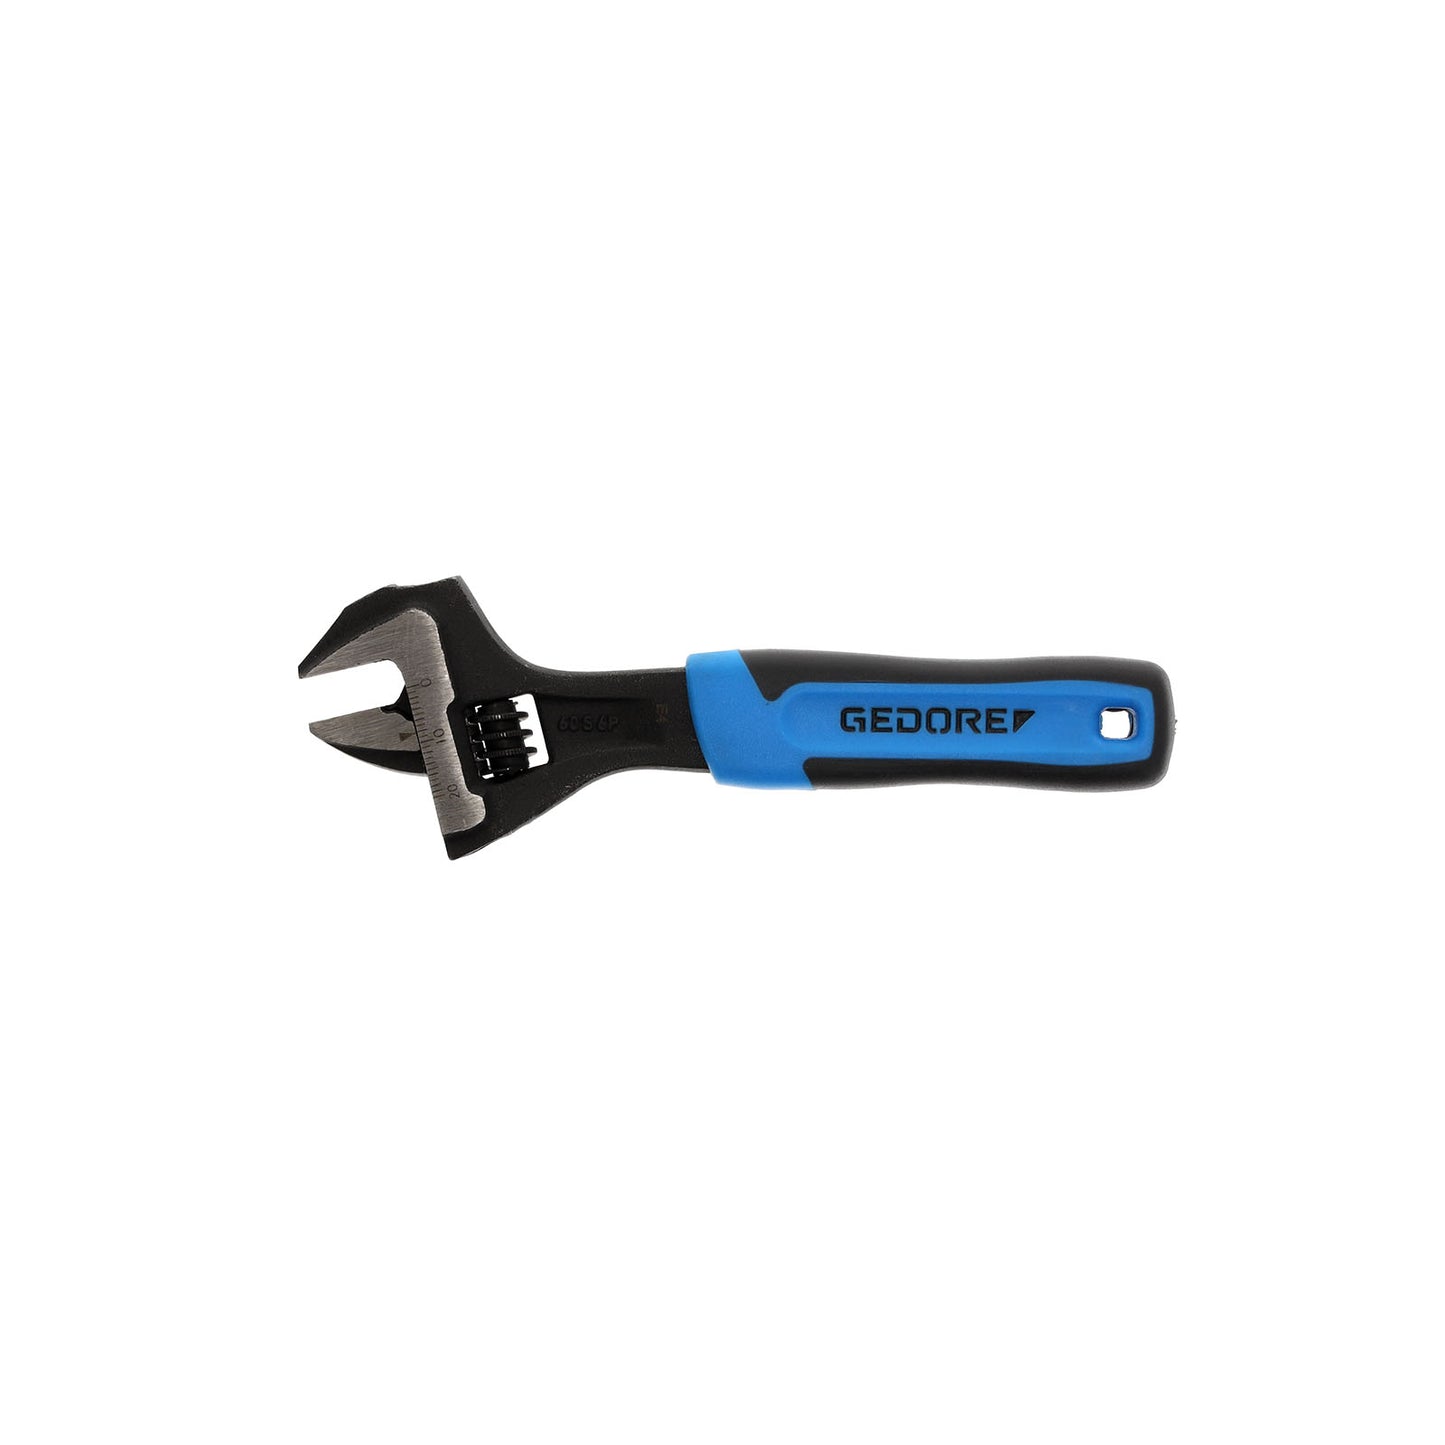 GEDORE 60 S 6 JP - Phosphated Adjustable Wrench, 6" (2668823)